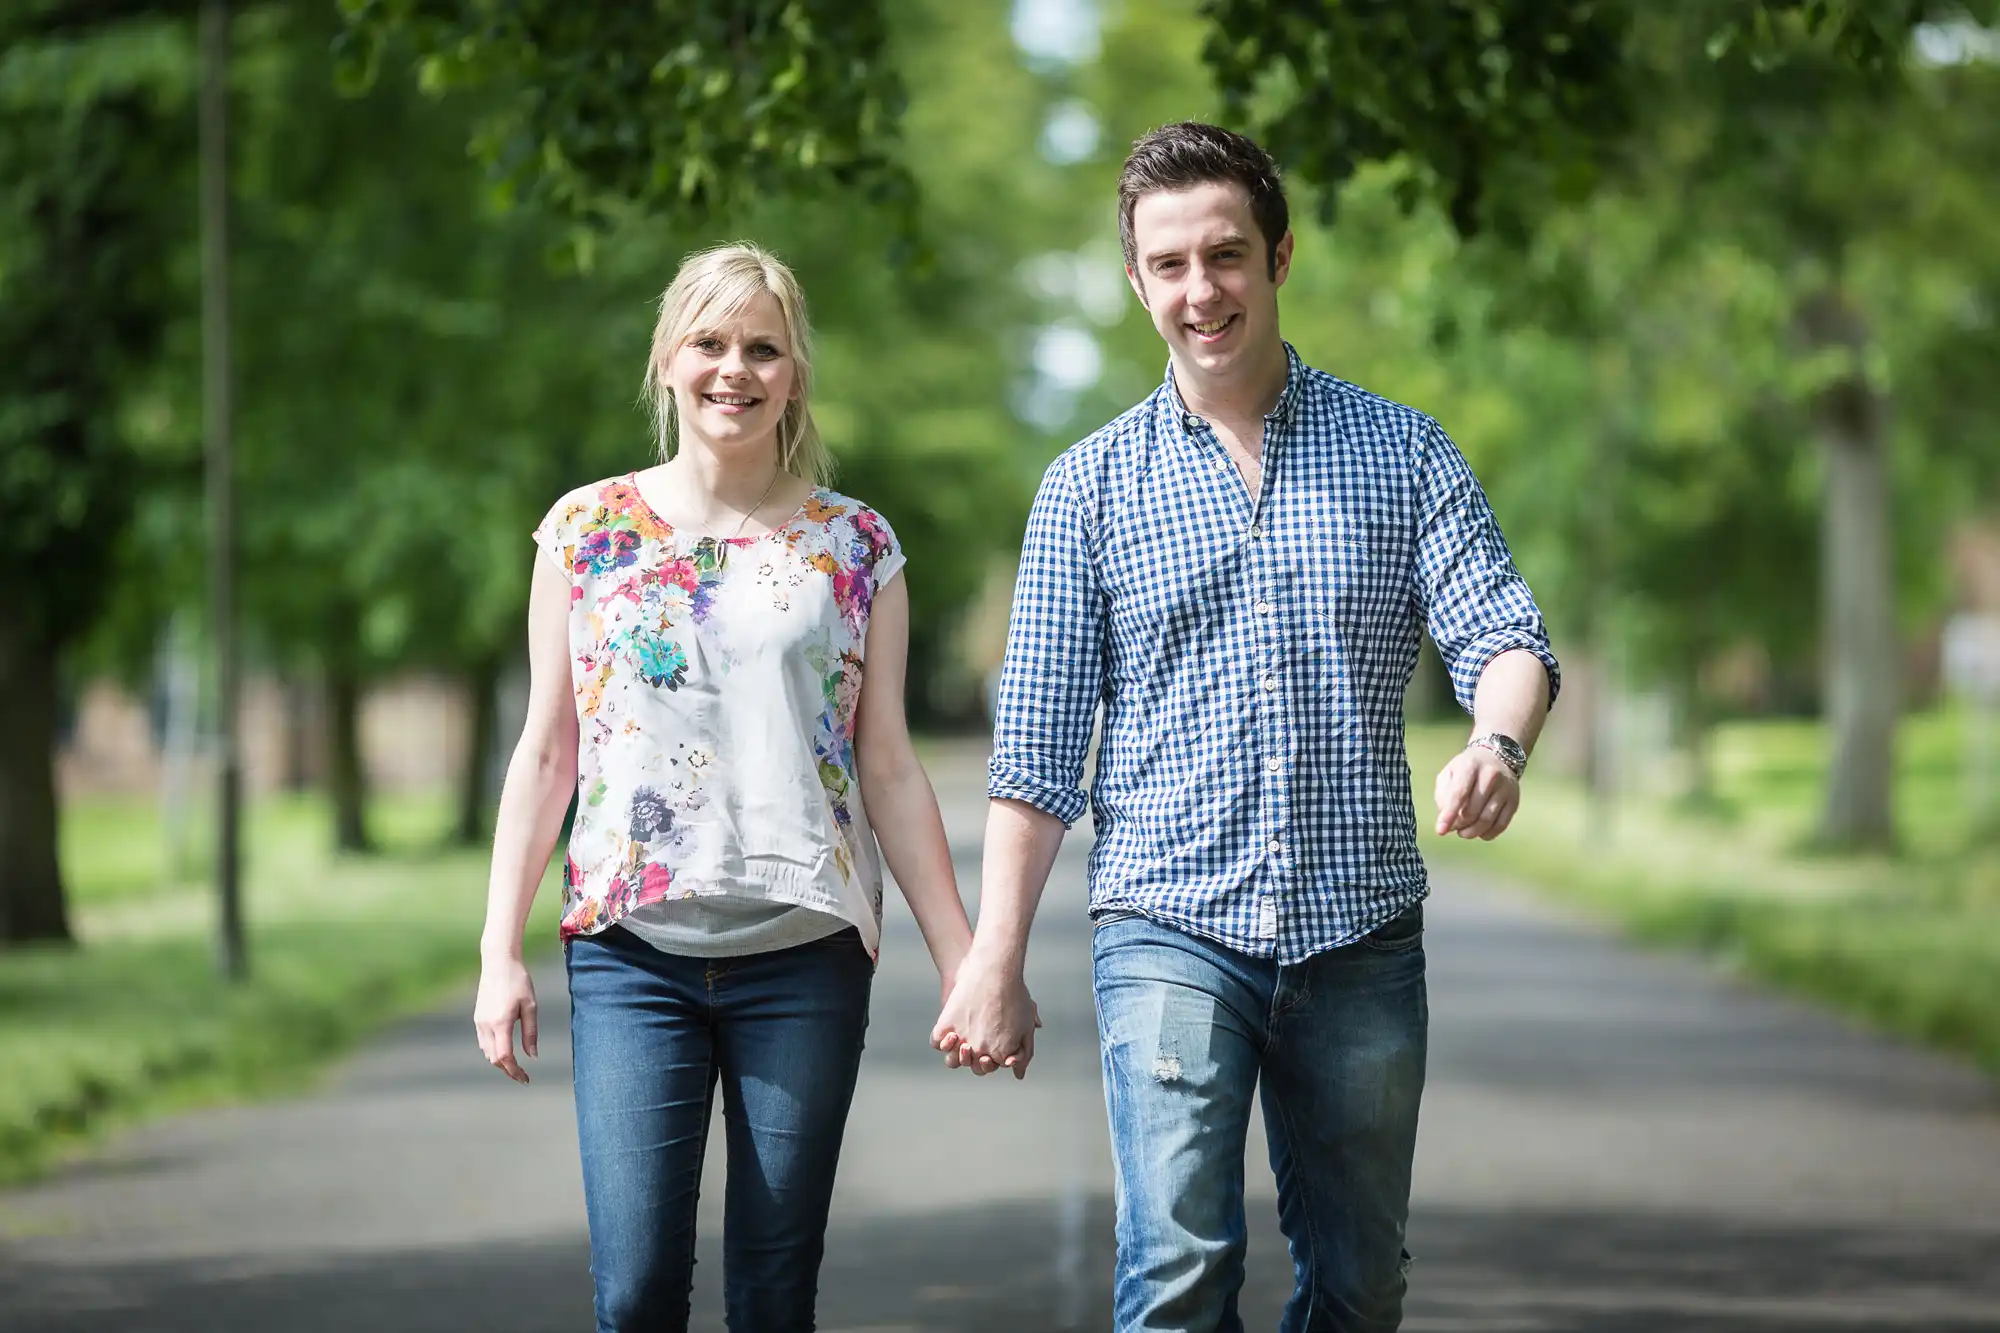 A man and a woman holding hands while walking on a tree-lined path, both smiling and looking towards the camera.